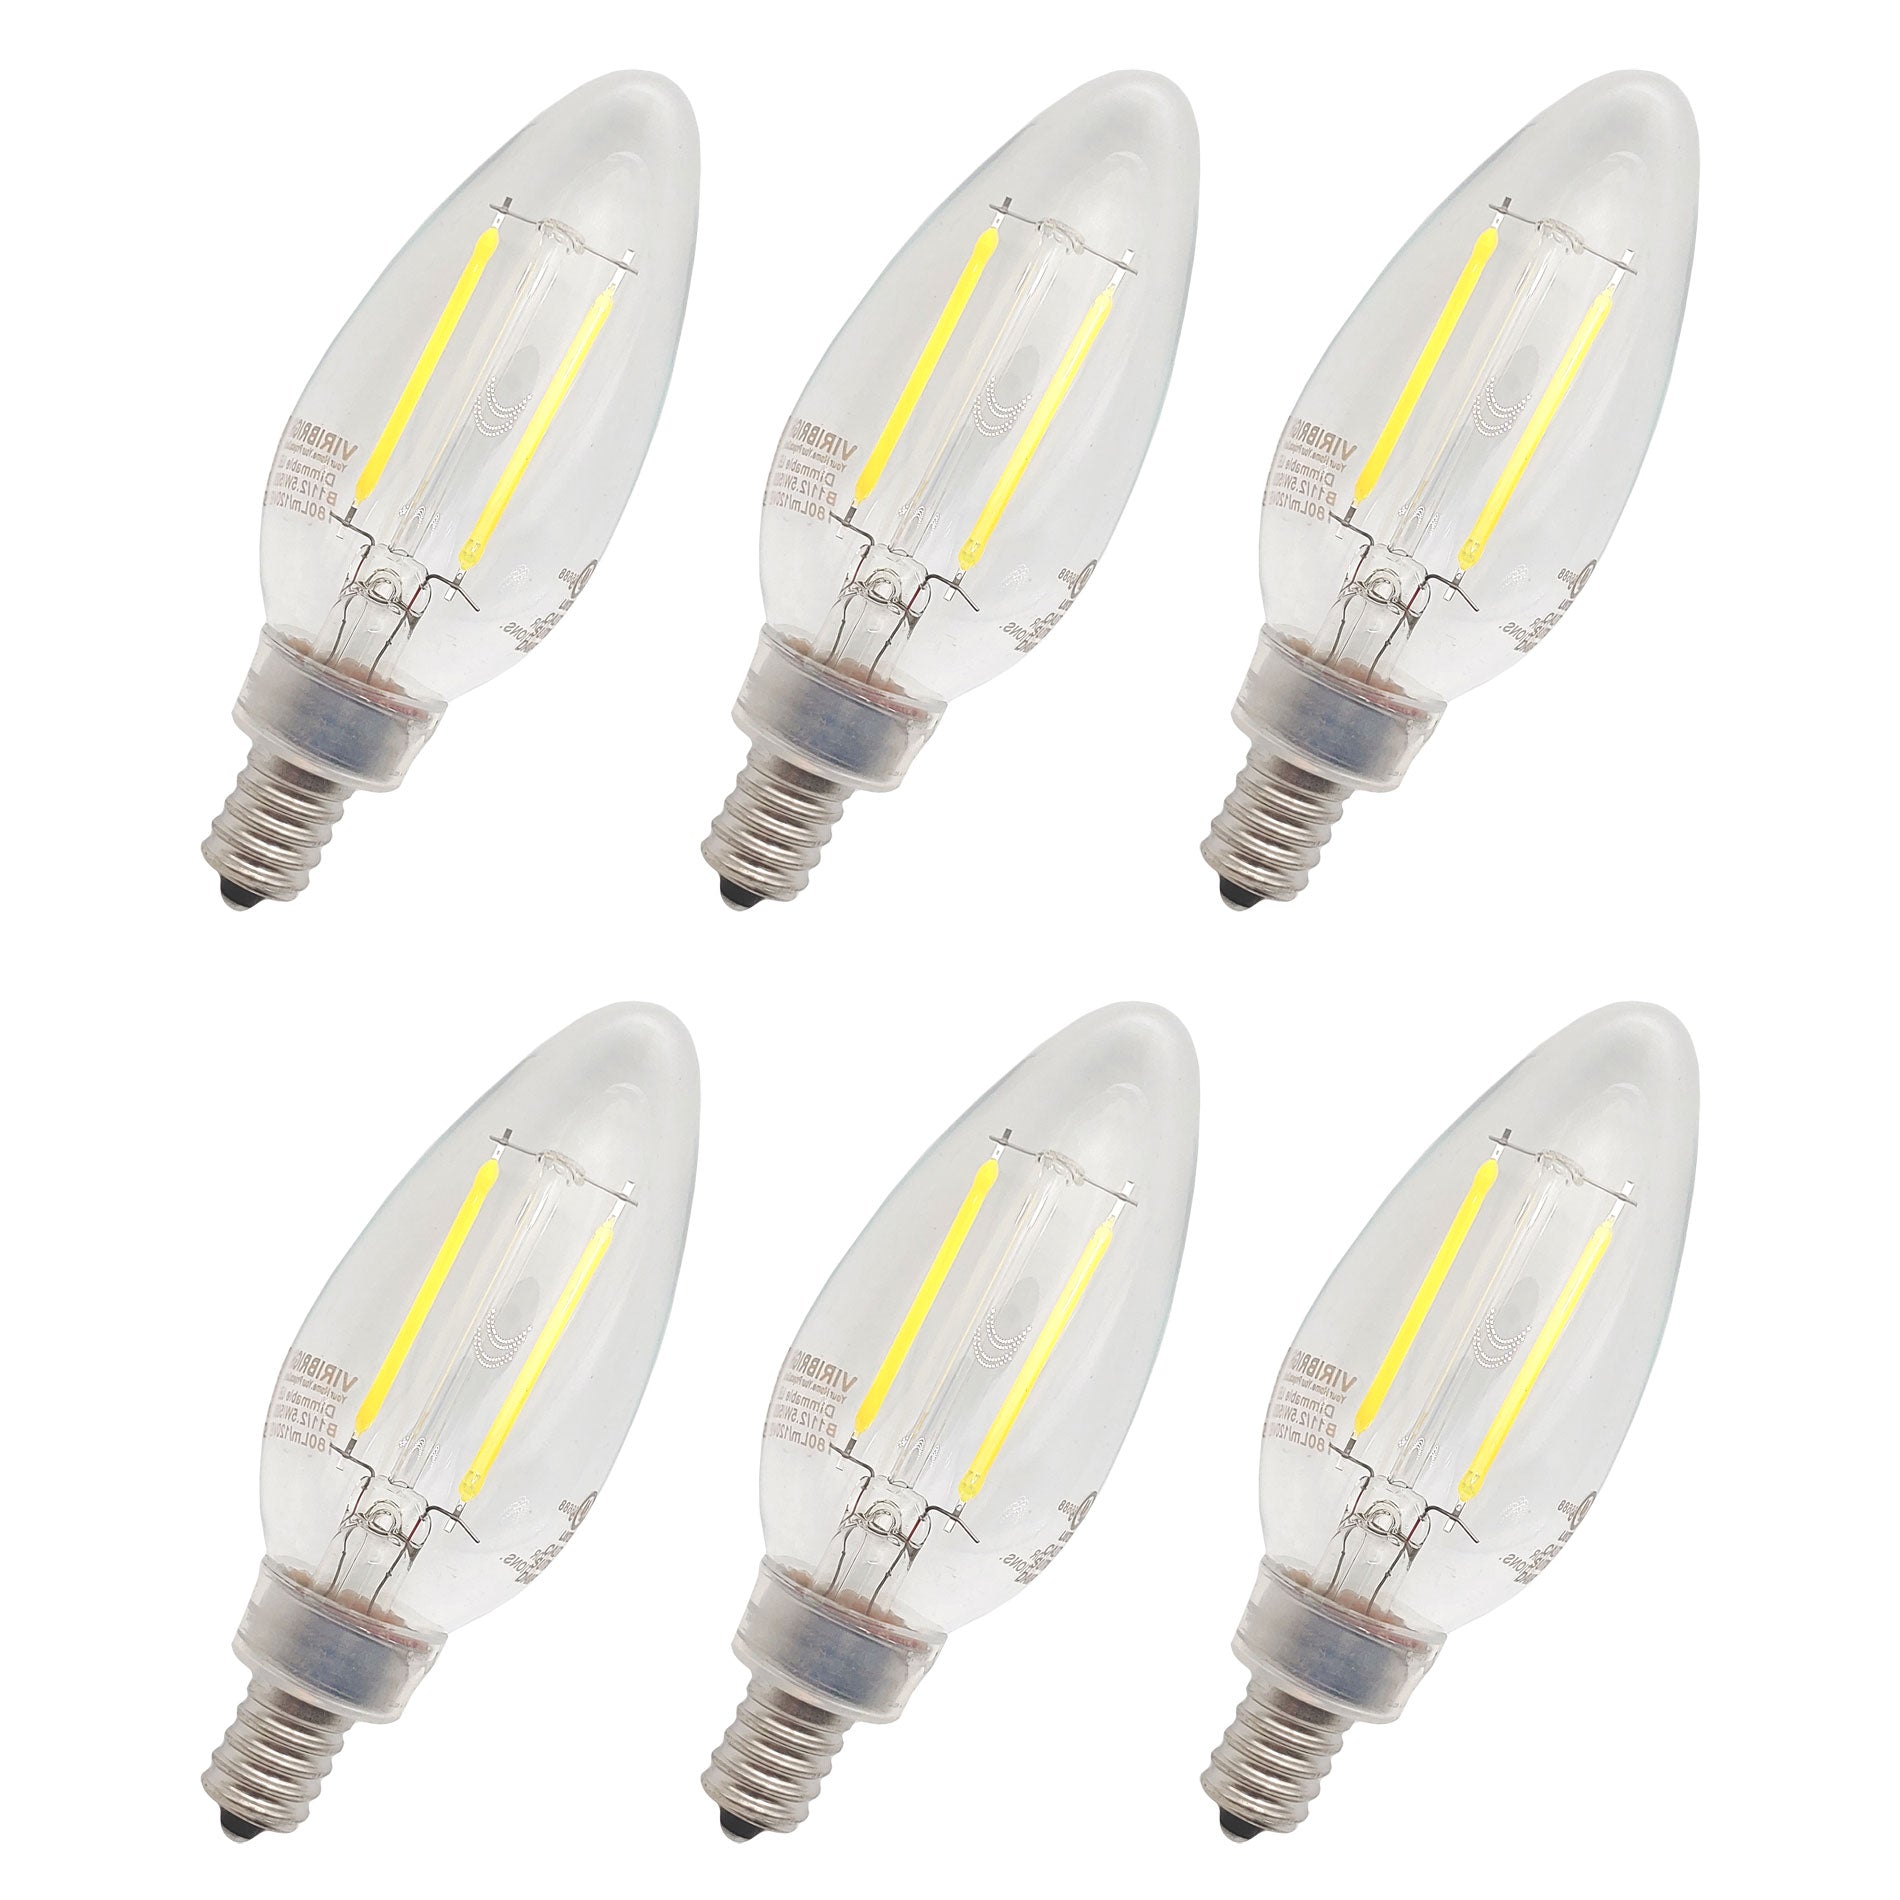 LED bulb for chandeliers